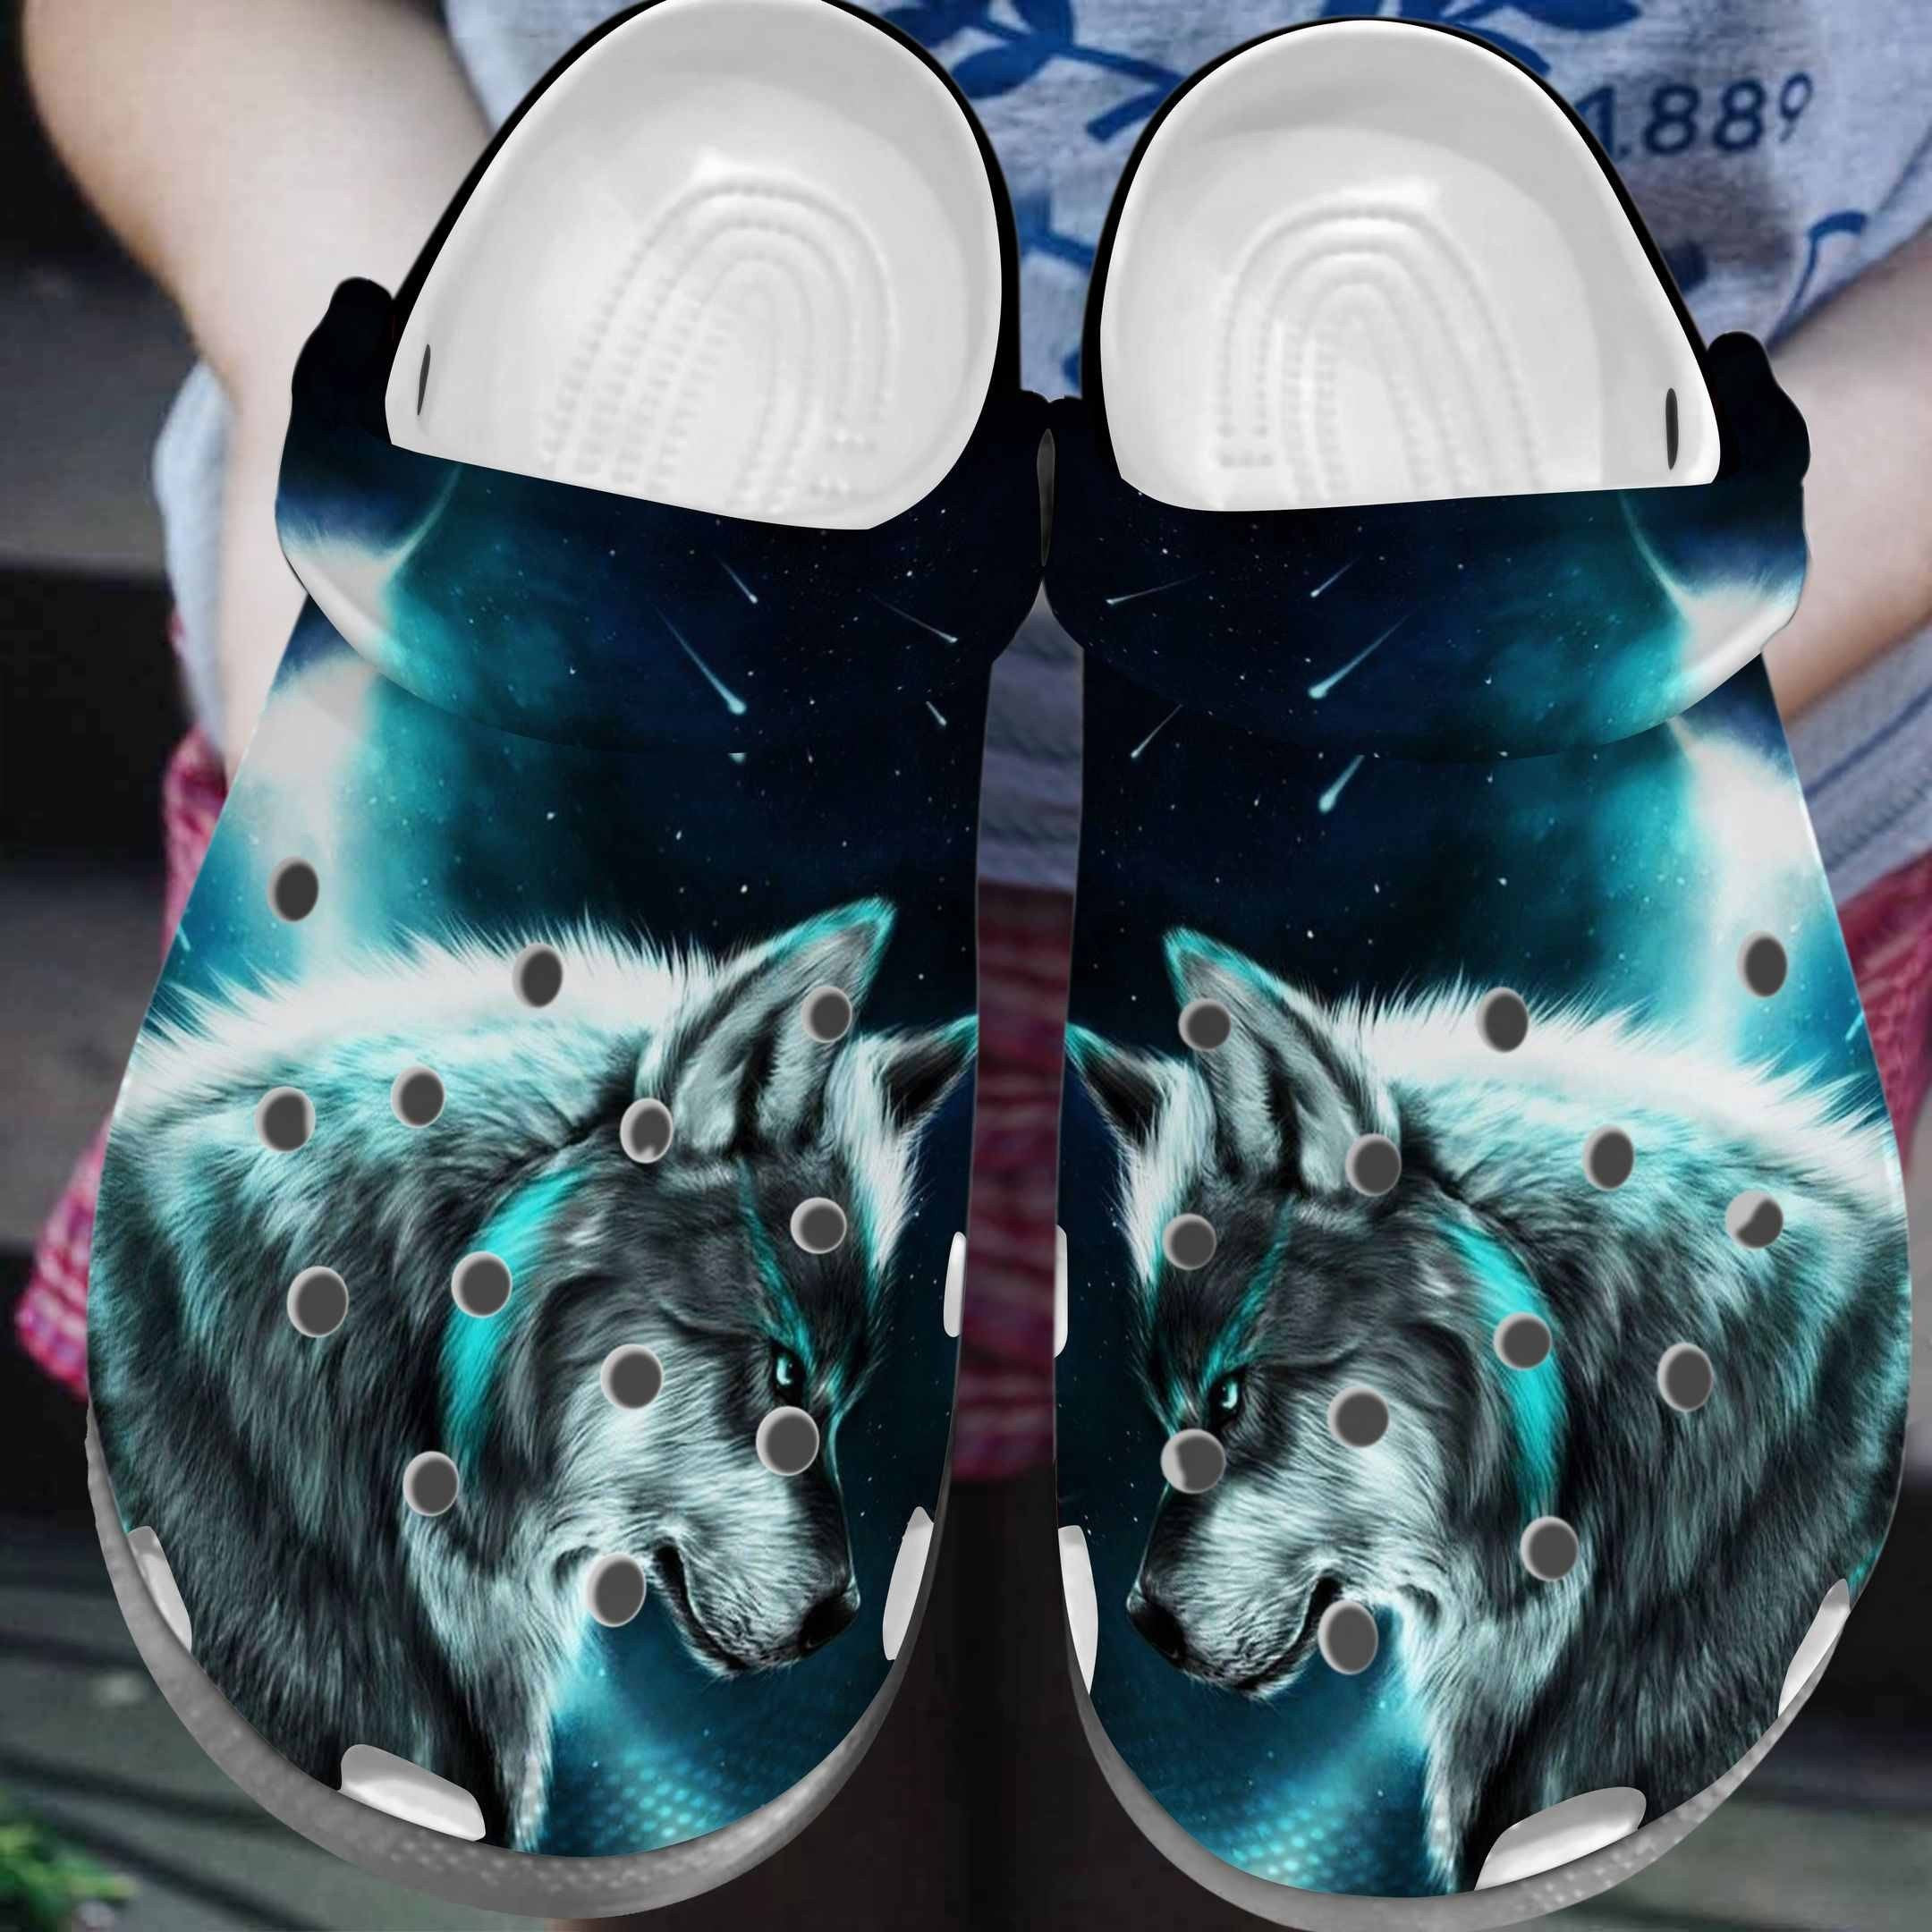 Awesome Cool Wolf Crocs Shoes Clogs – Wolf Night Custom Shoe Birthday Gifts For Men Son Cousin Father